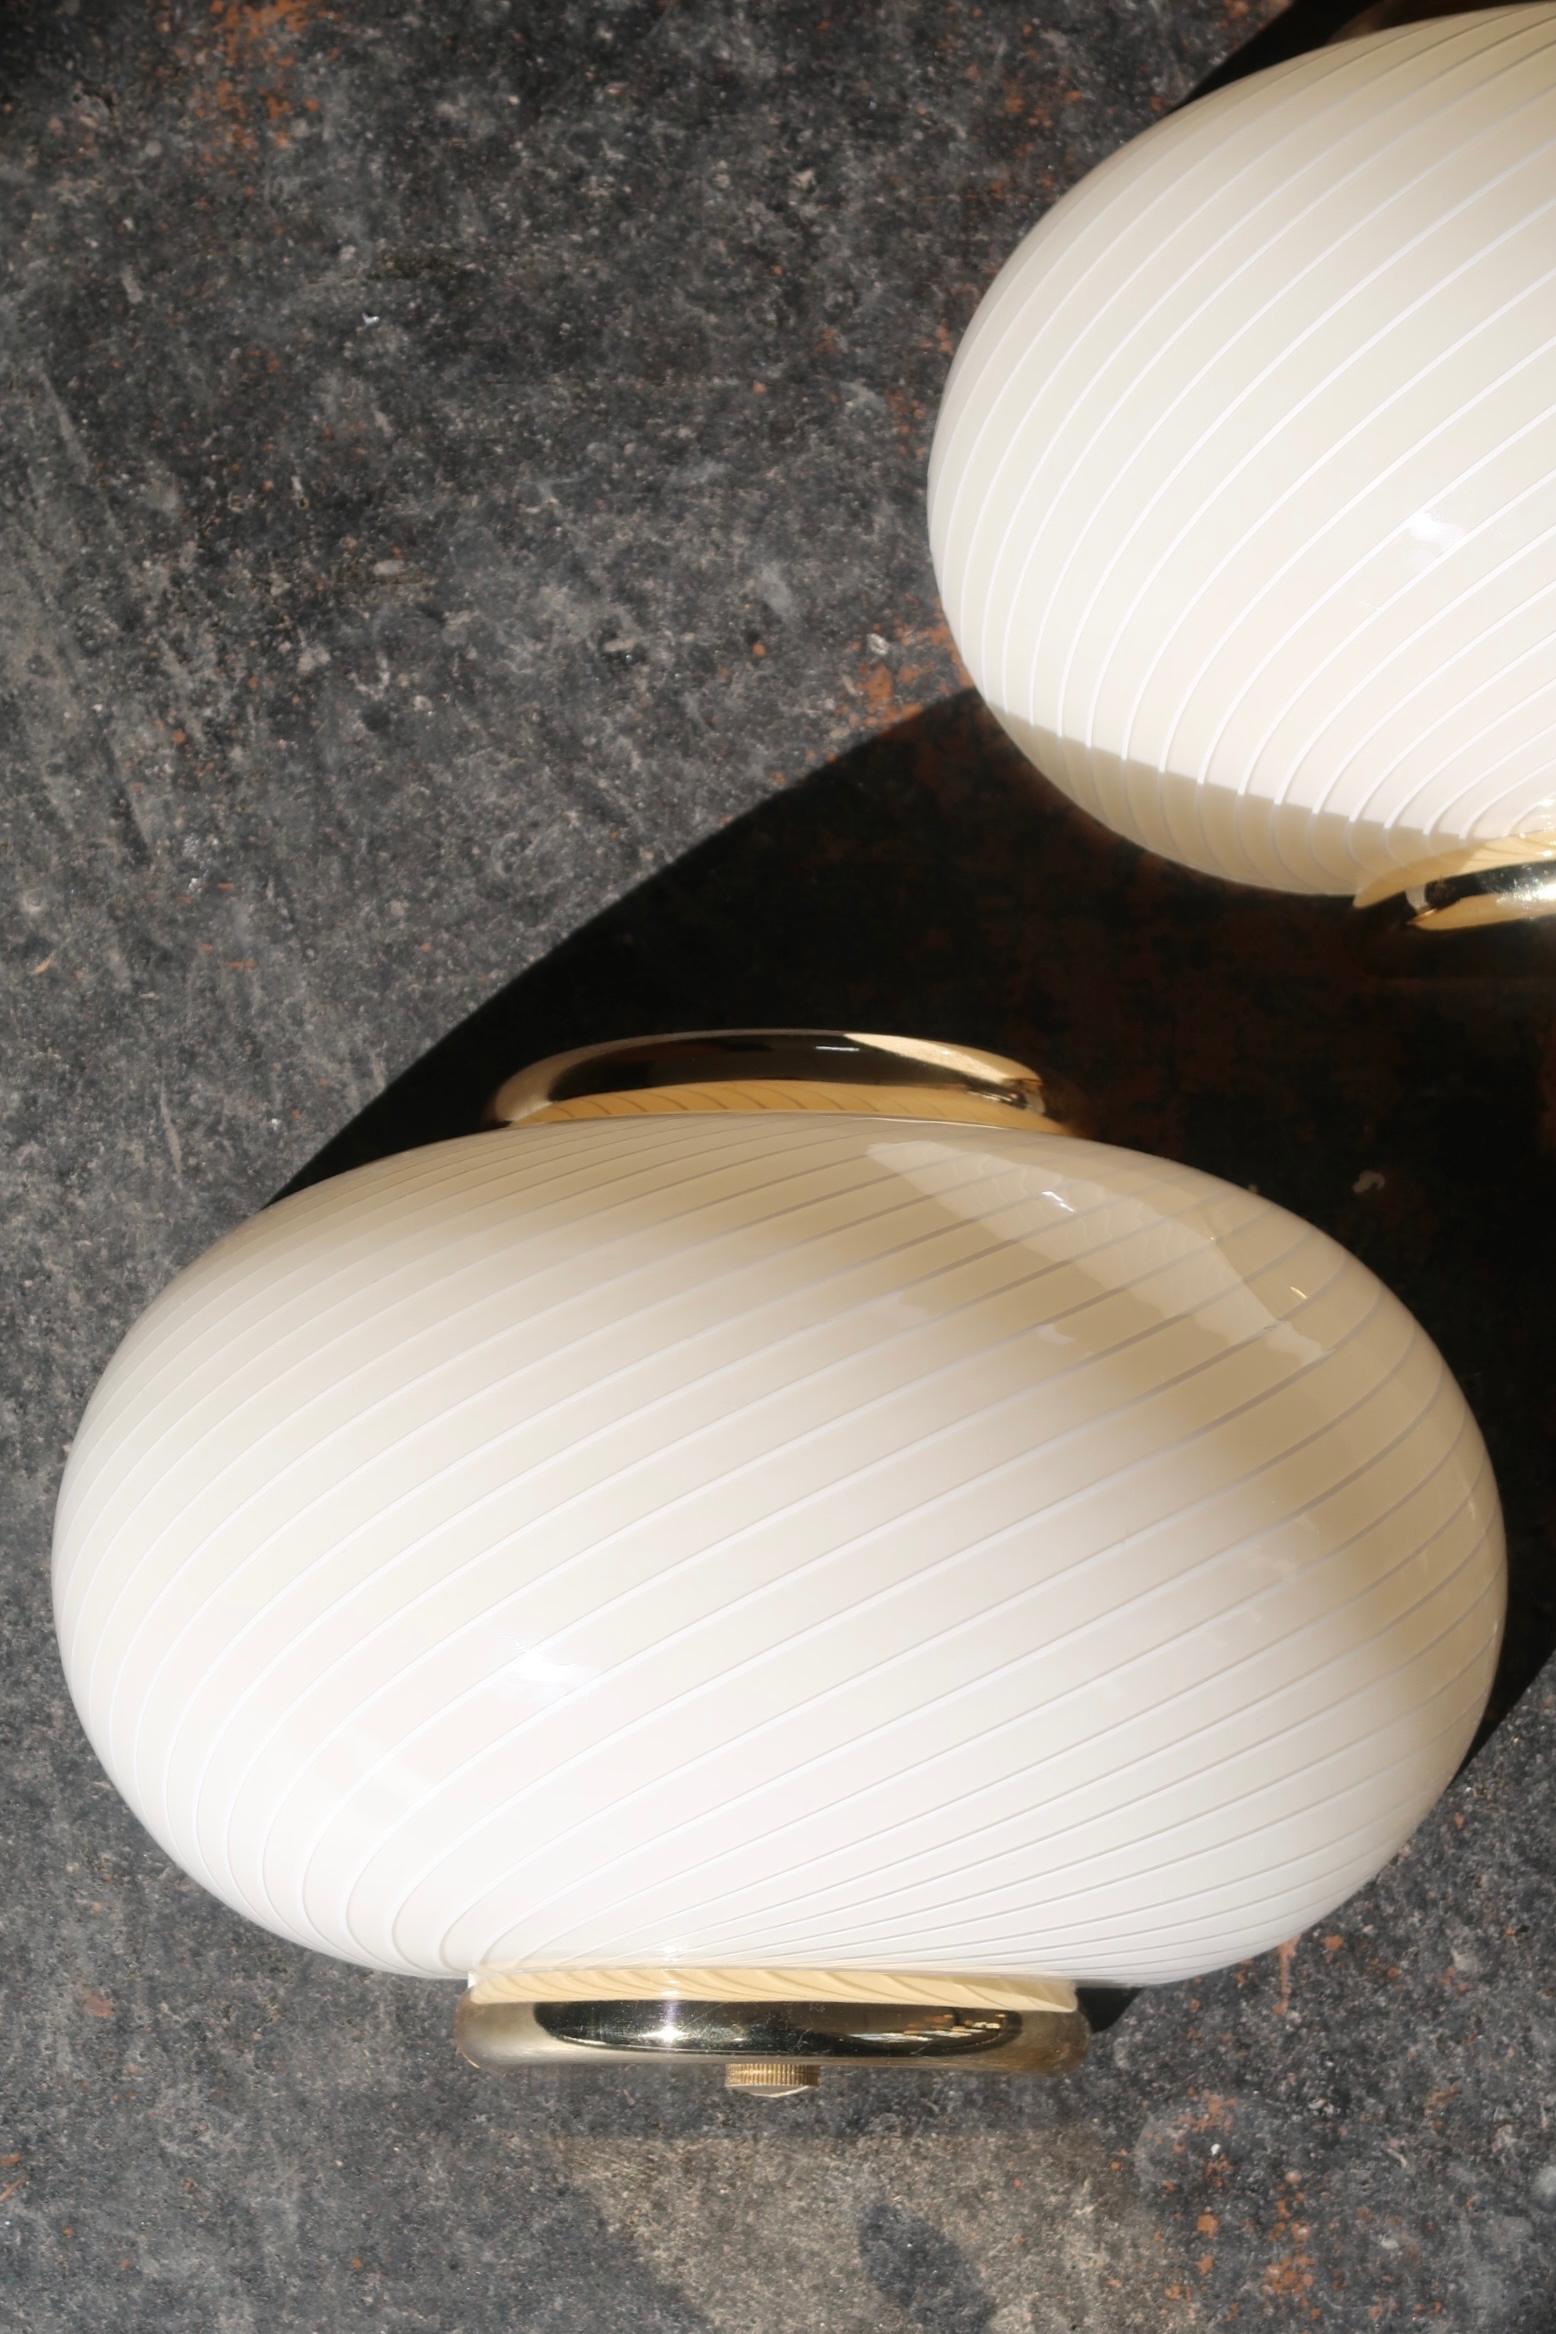 Pair of 2 pcs. vintage Murano cream wall lamps with white swirl pattern and brass fittings. Perfect size for your entrance, in the kitchen, in the bathroom or as reading lamps in the bedroom. Super easy to install. Mouth blown in Italy, 1960/70s and